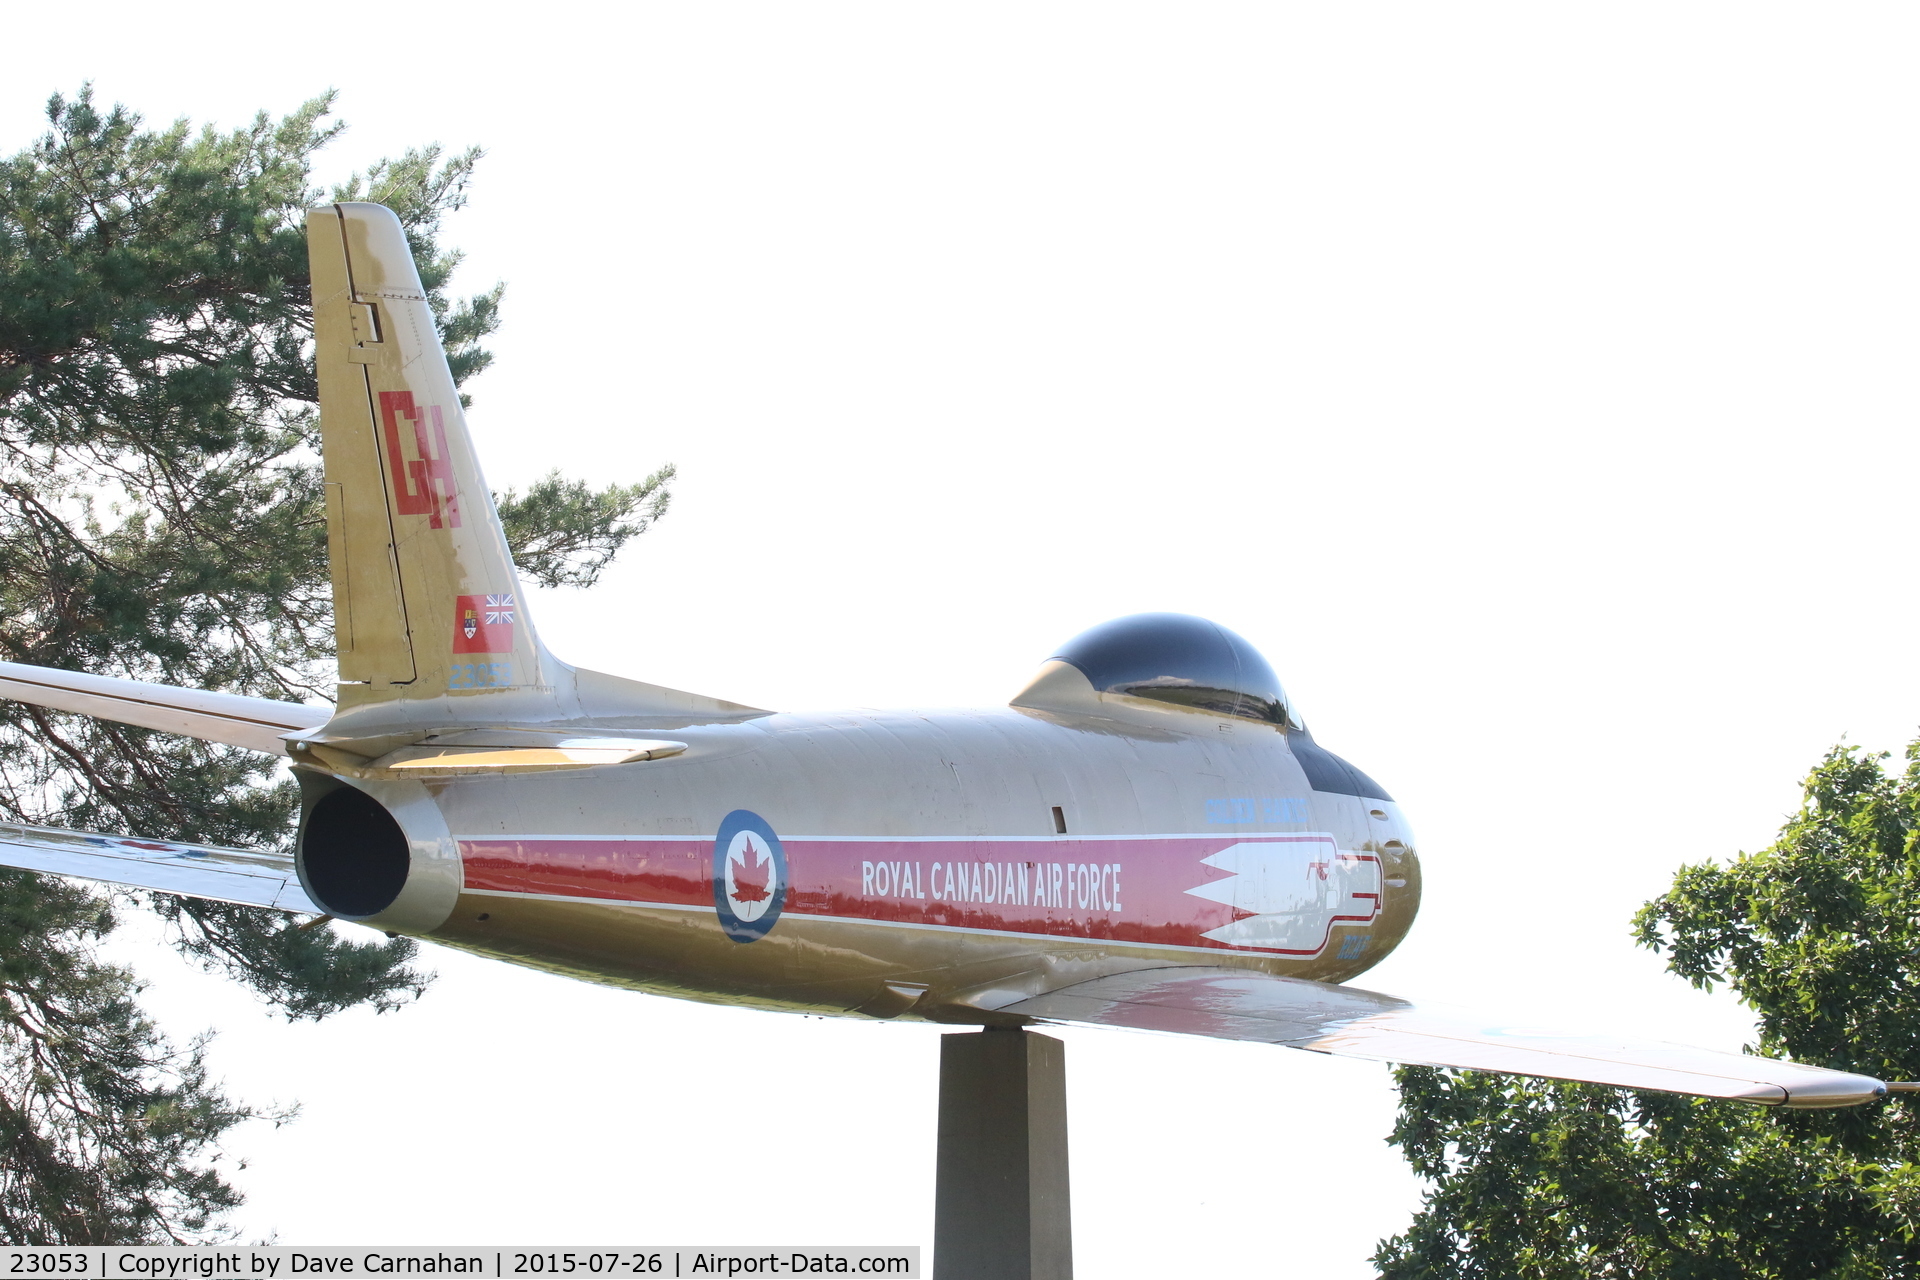 23053, Canadair CL-13 Sabre 5 C/N 843, Now mounted as a static display at Zwick's Park - Belleville, Ontario